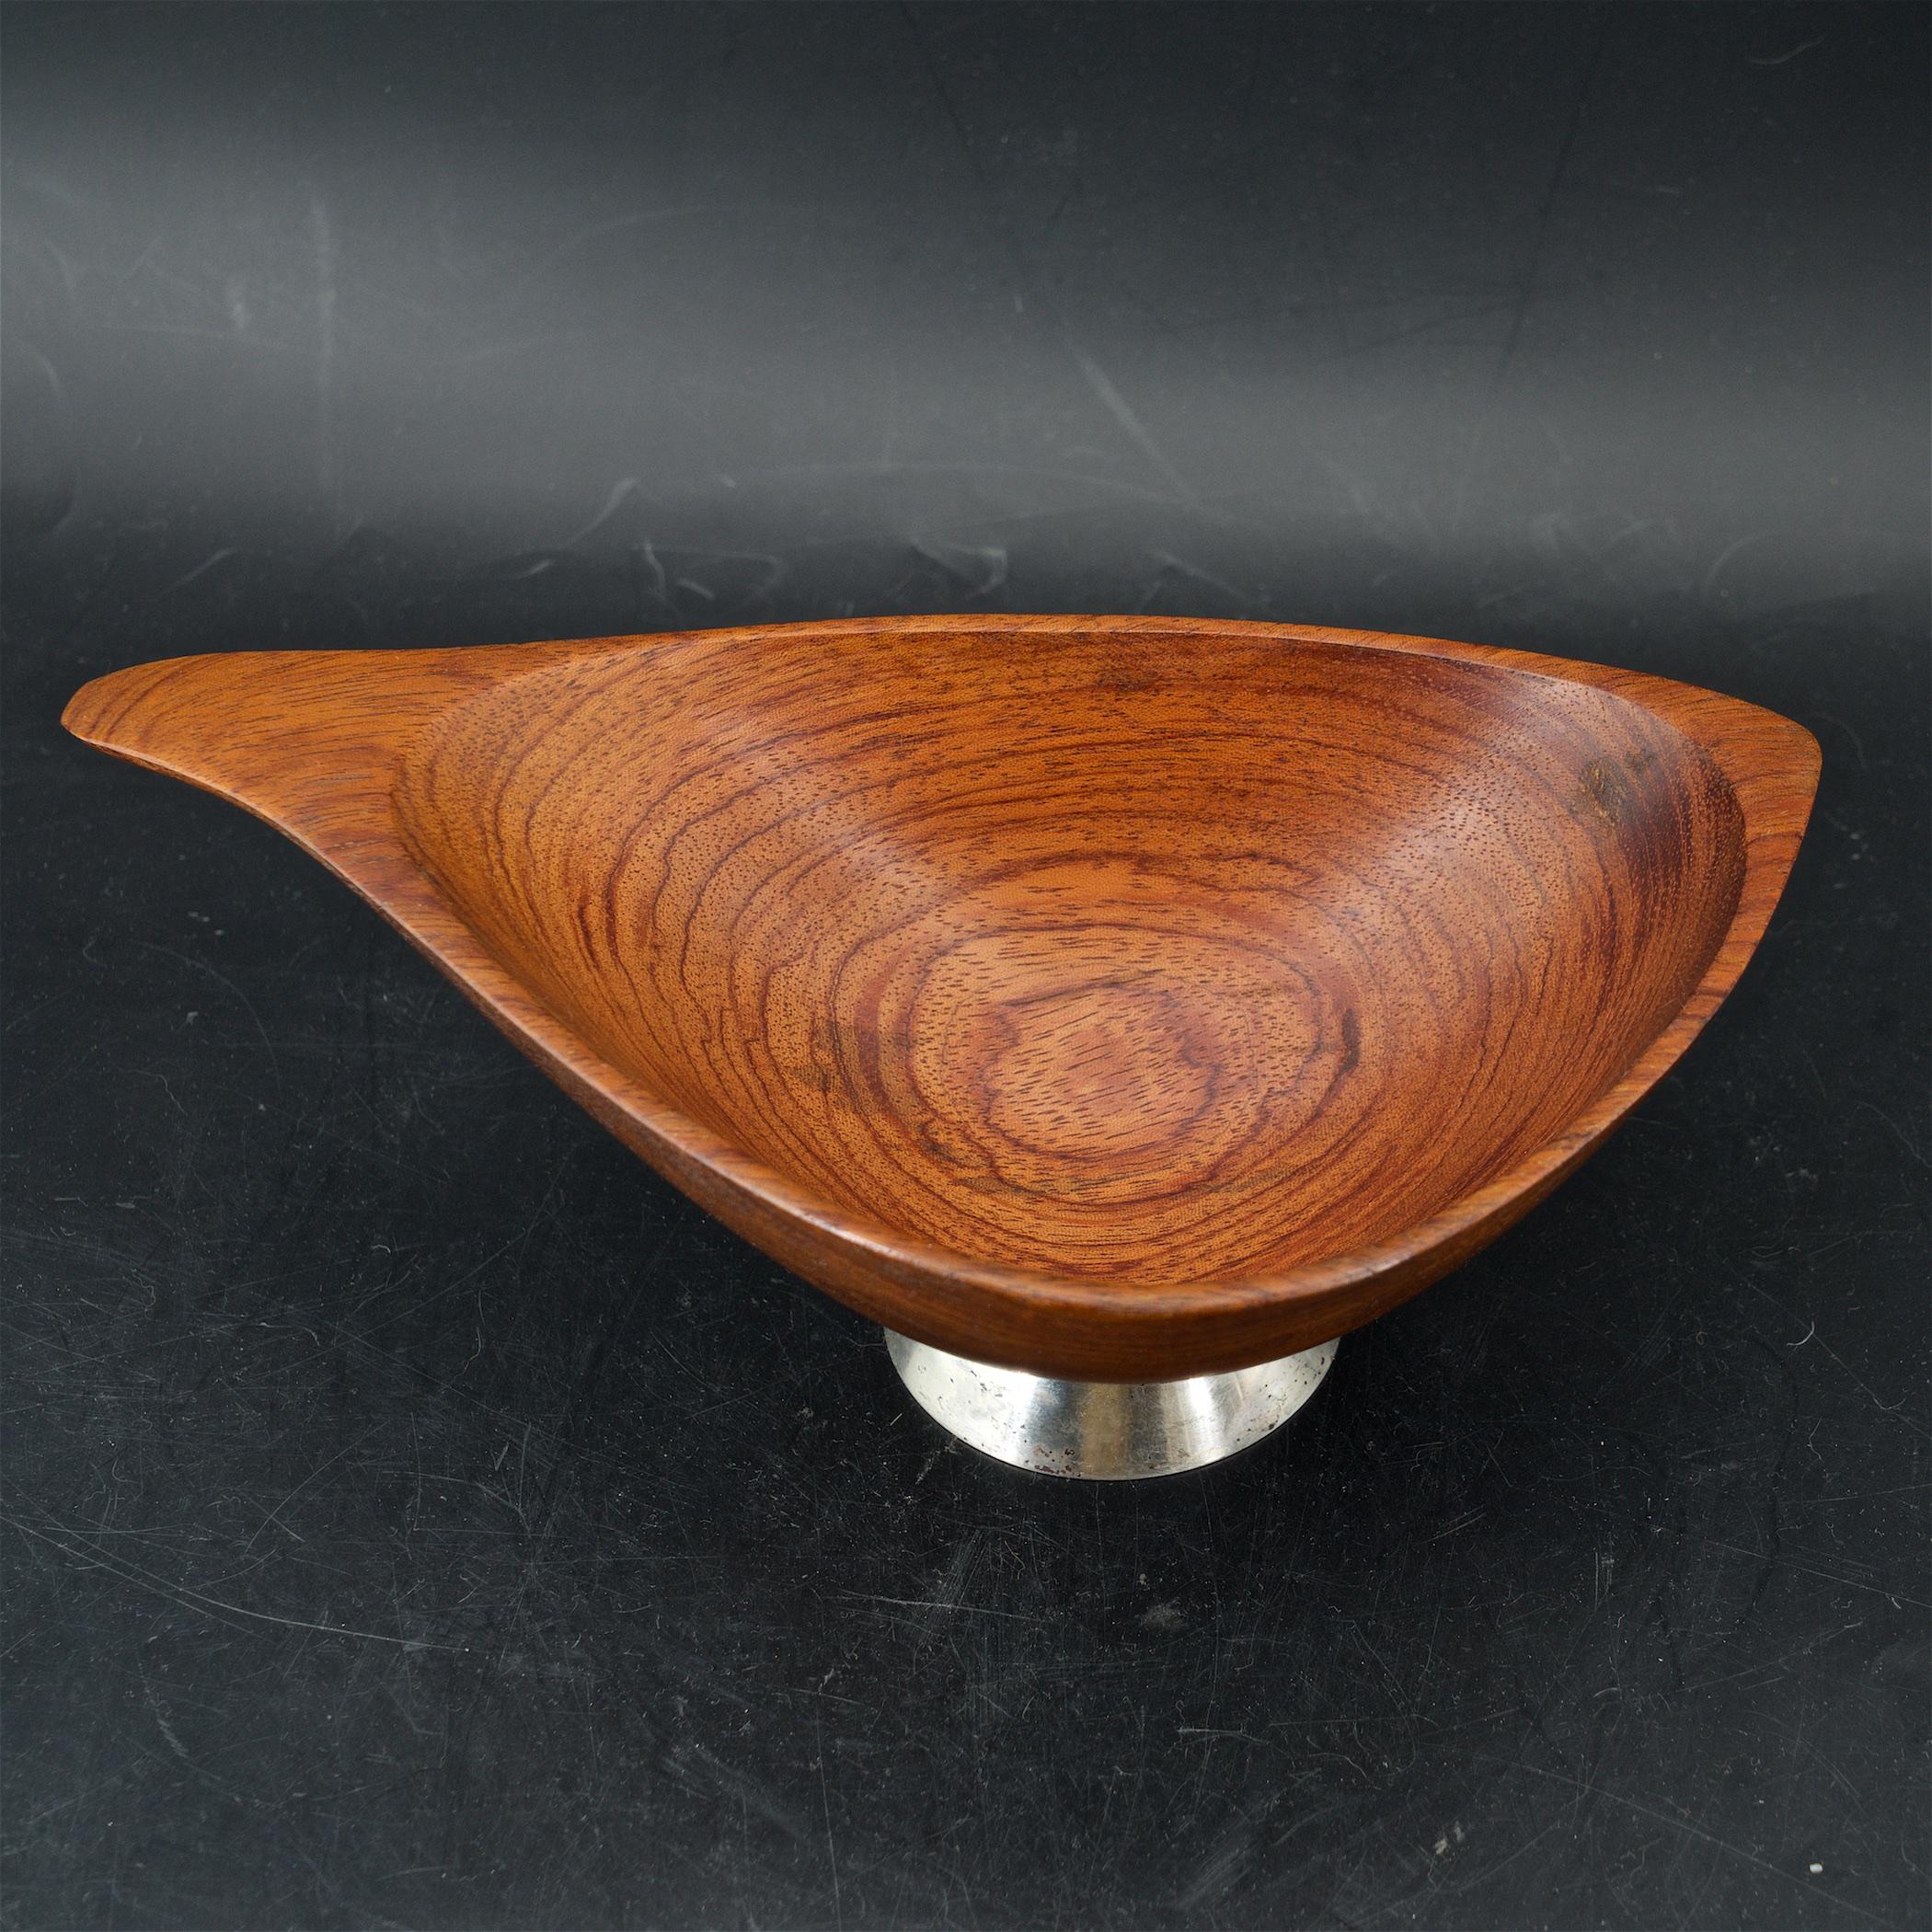 Hand-Crafted Organic Craftsman Sterling Footed Bubinga Bowl Midcentury 1960s American Design